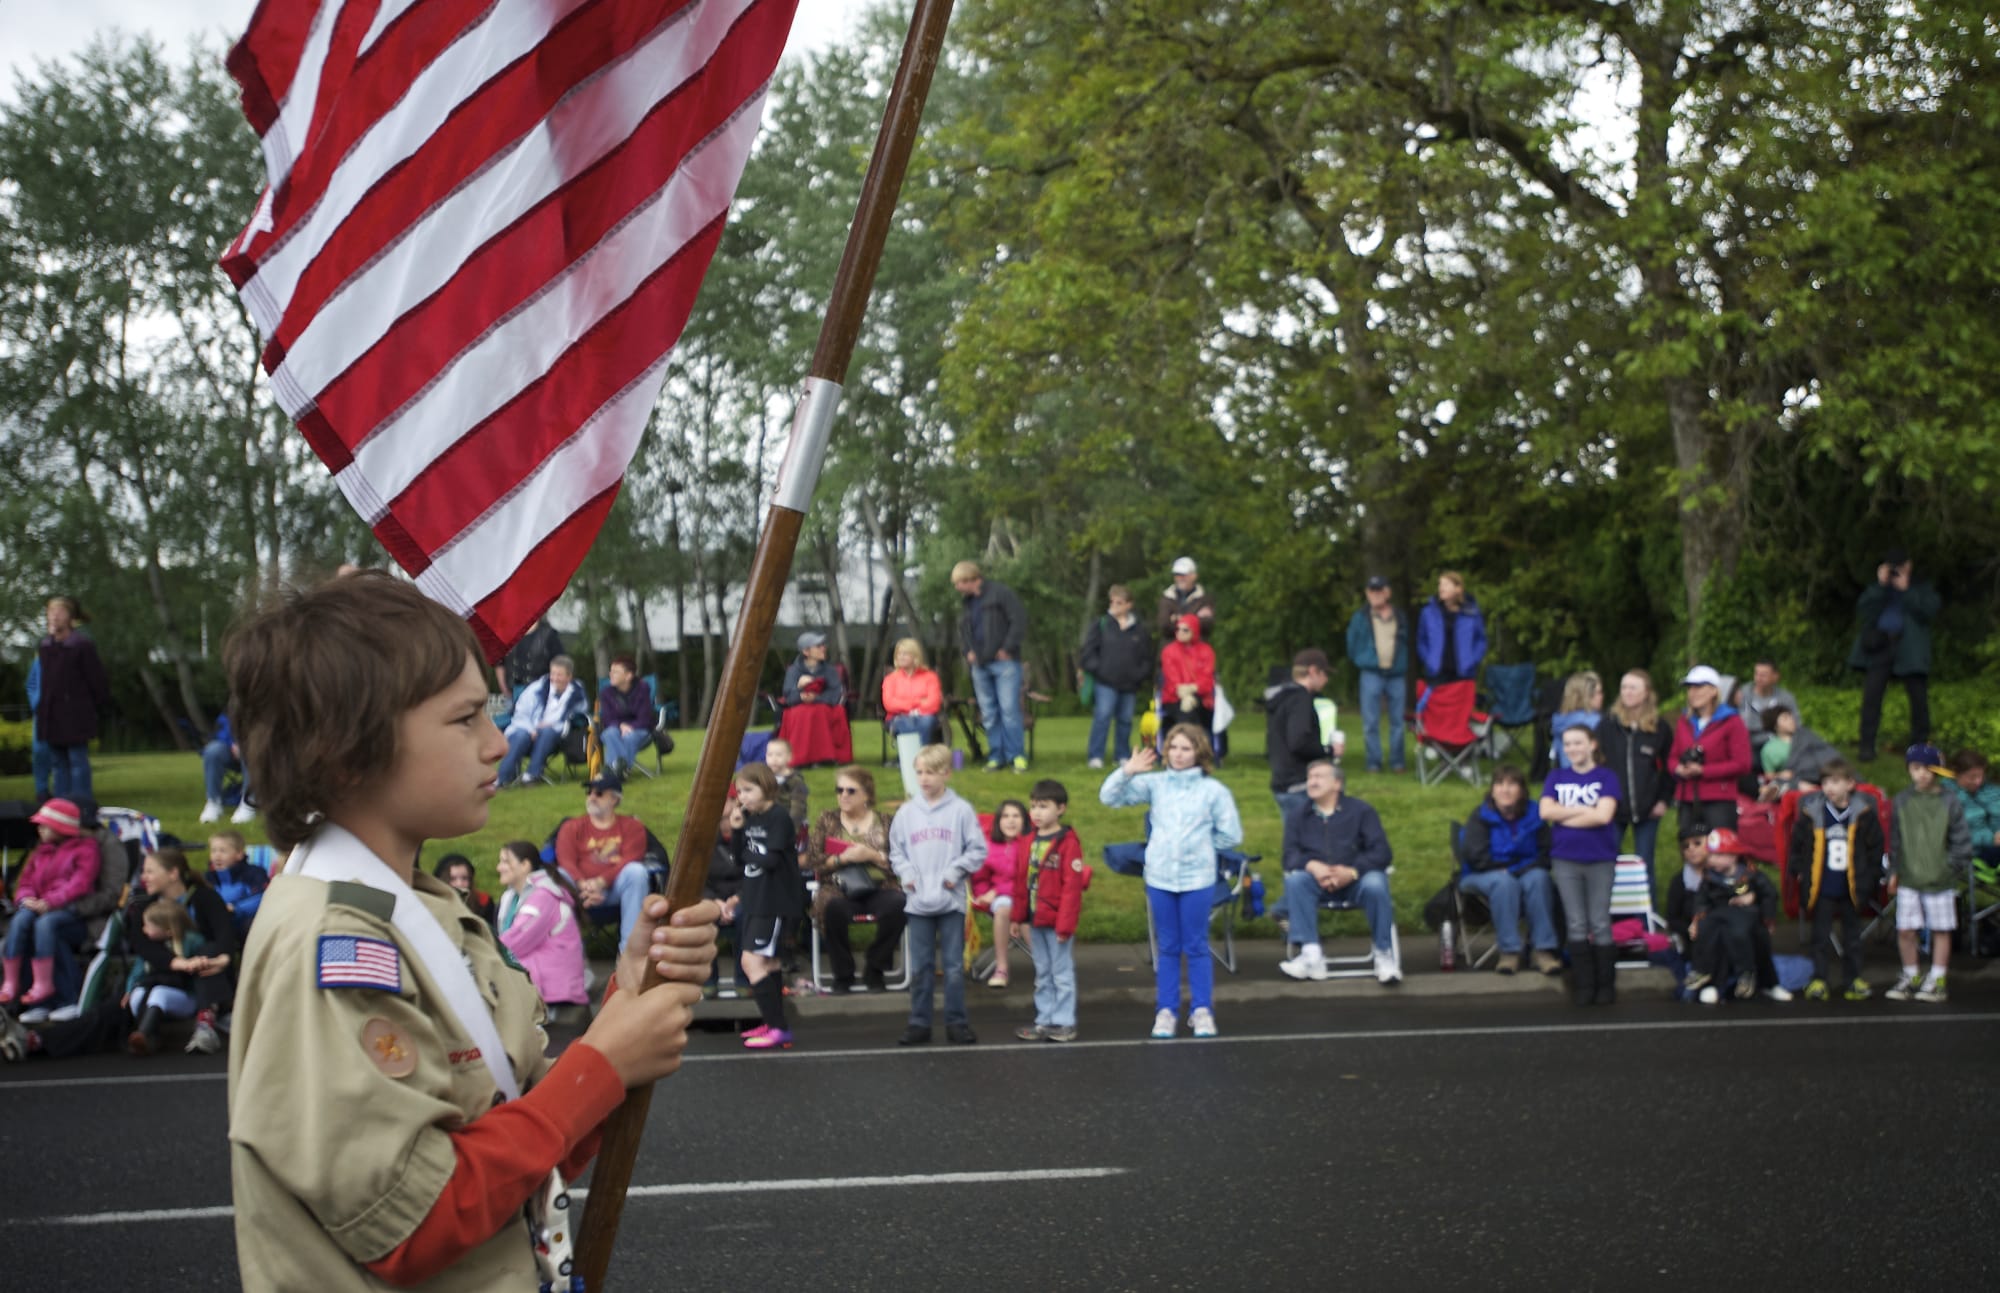 Zachariah Taylor of Vancouver holds the American flag while representing Cub Scout Pack 306 in the 2013 Parade of Bands in Hazel Dell.